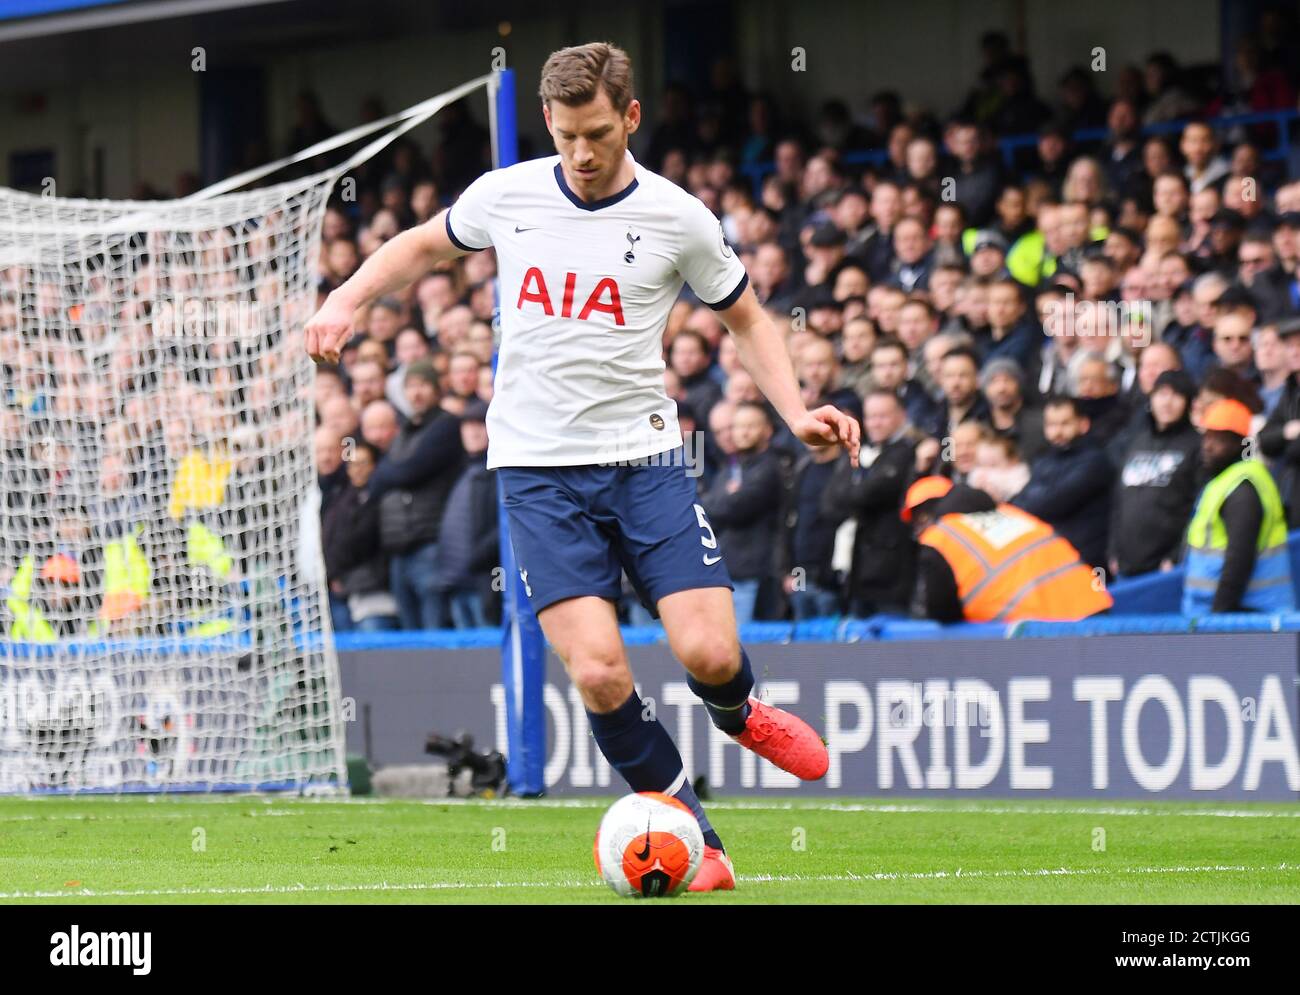 LONDON, ENGLAND - FEBRUARY 22, 2020: Jan Vertonghen of Tottenham pictured during the 2019/20 Premier League game between Chelsea FC and Tottenham Hotspur FC at Stamford Bridge. Stock Photo